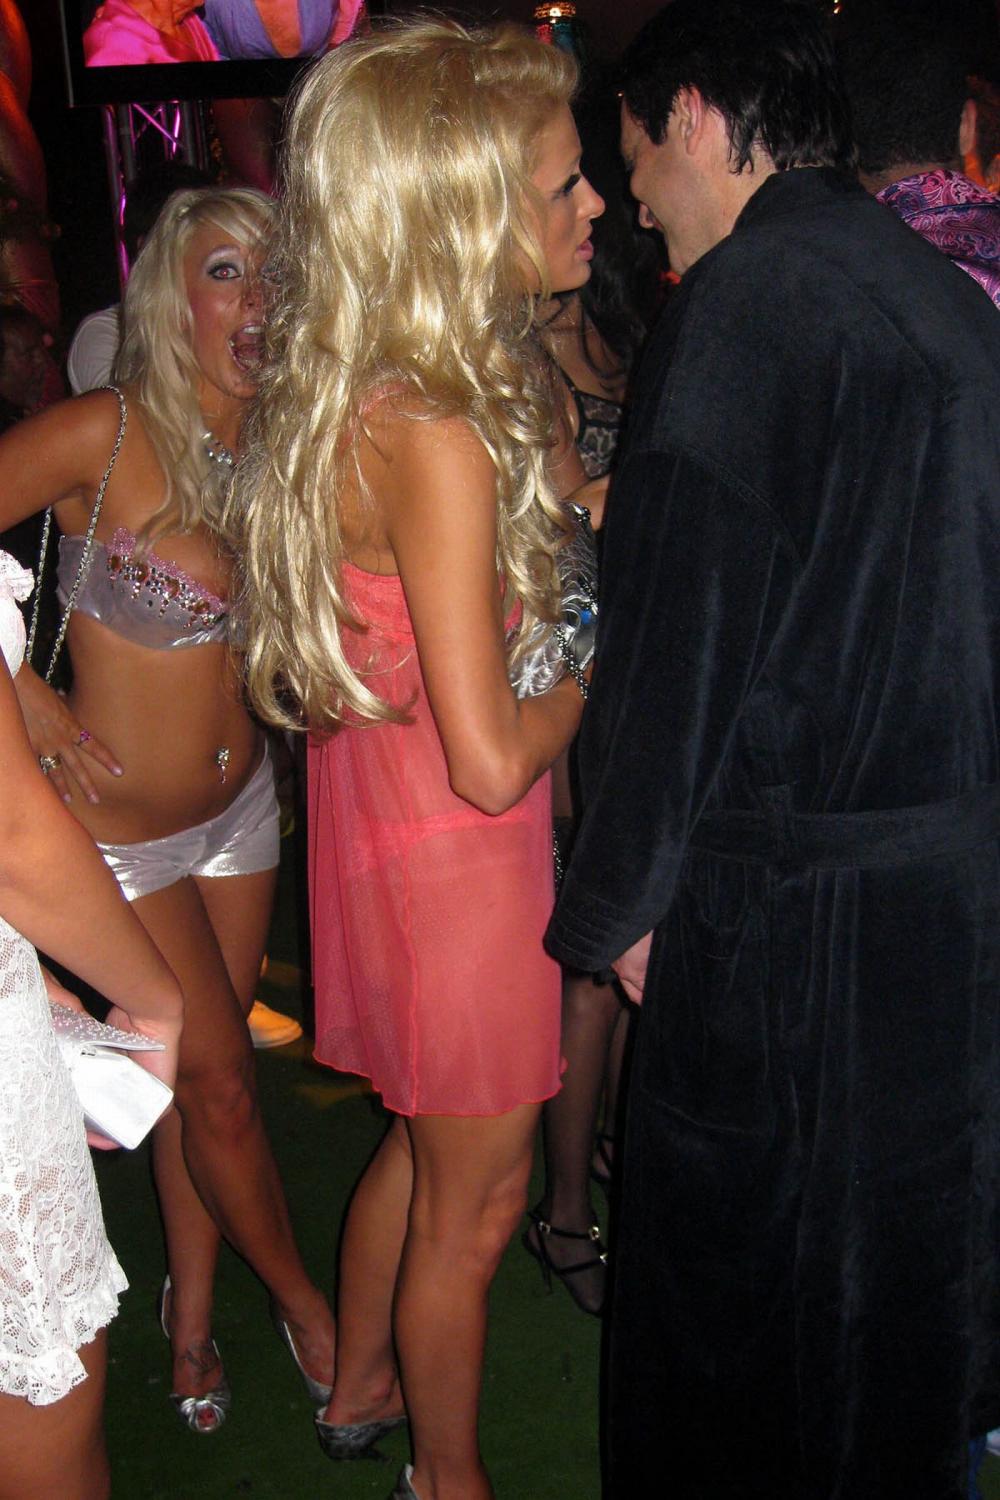 Paris+Hilton+is+Back+to+Her+Skanky+Ways+in+a+Pink+See+Through+Number+at+the...